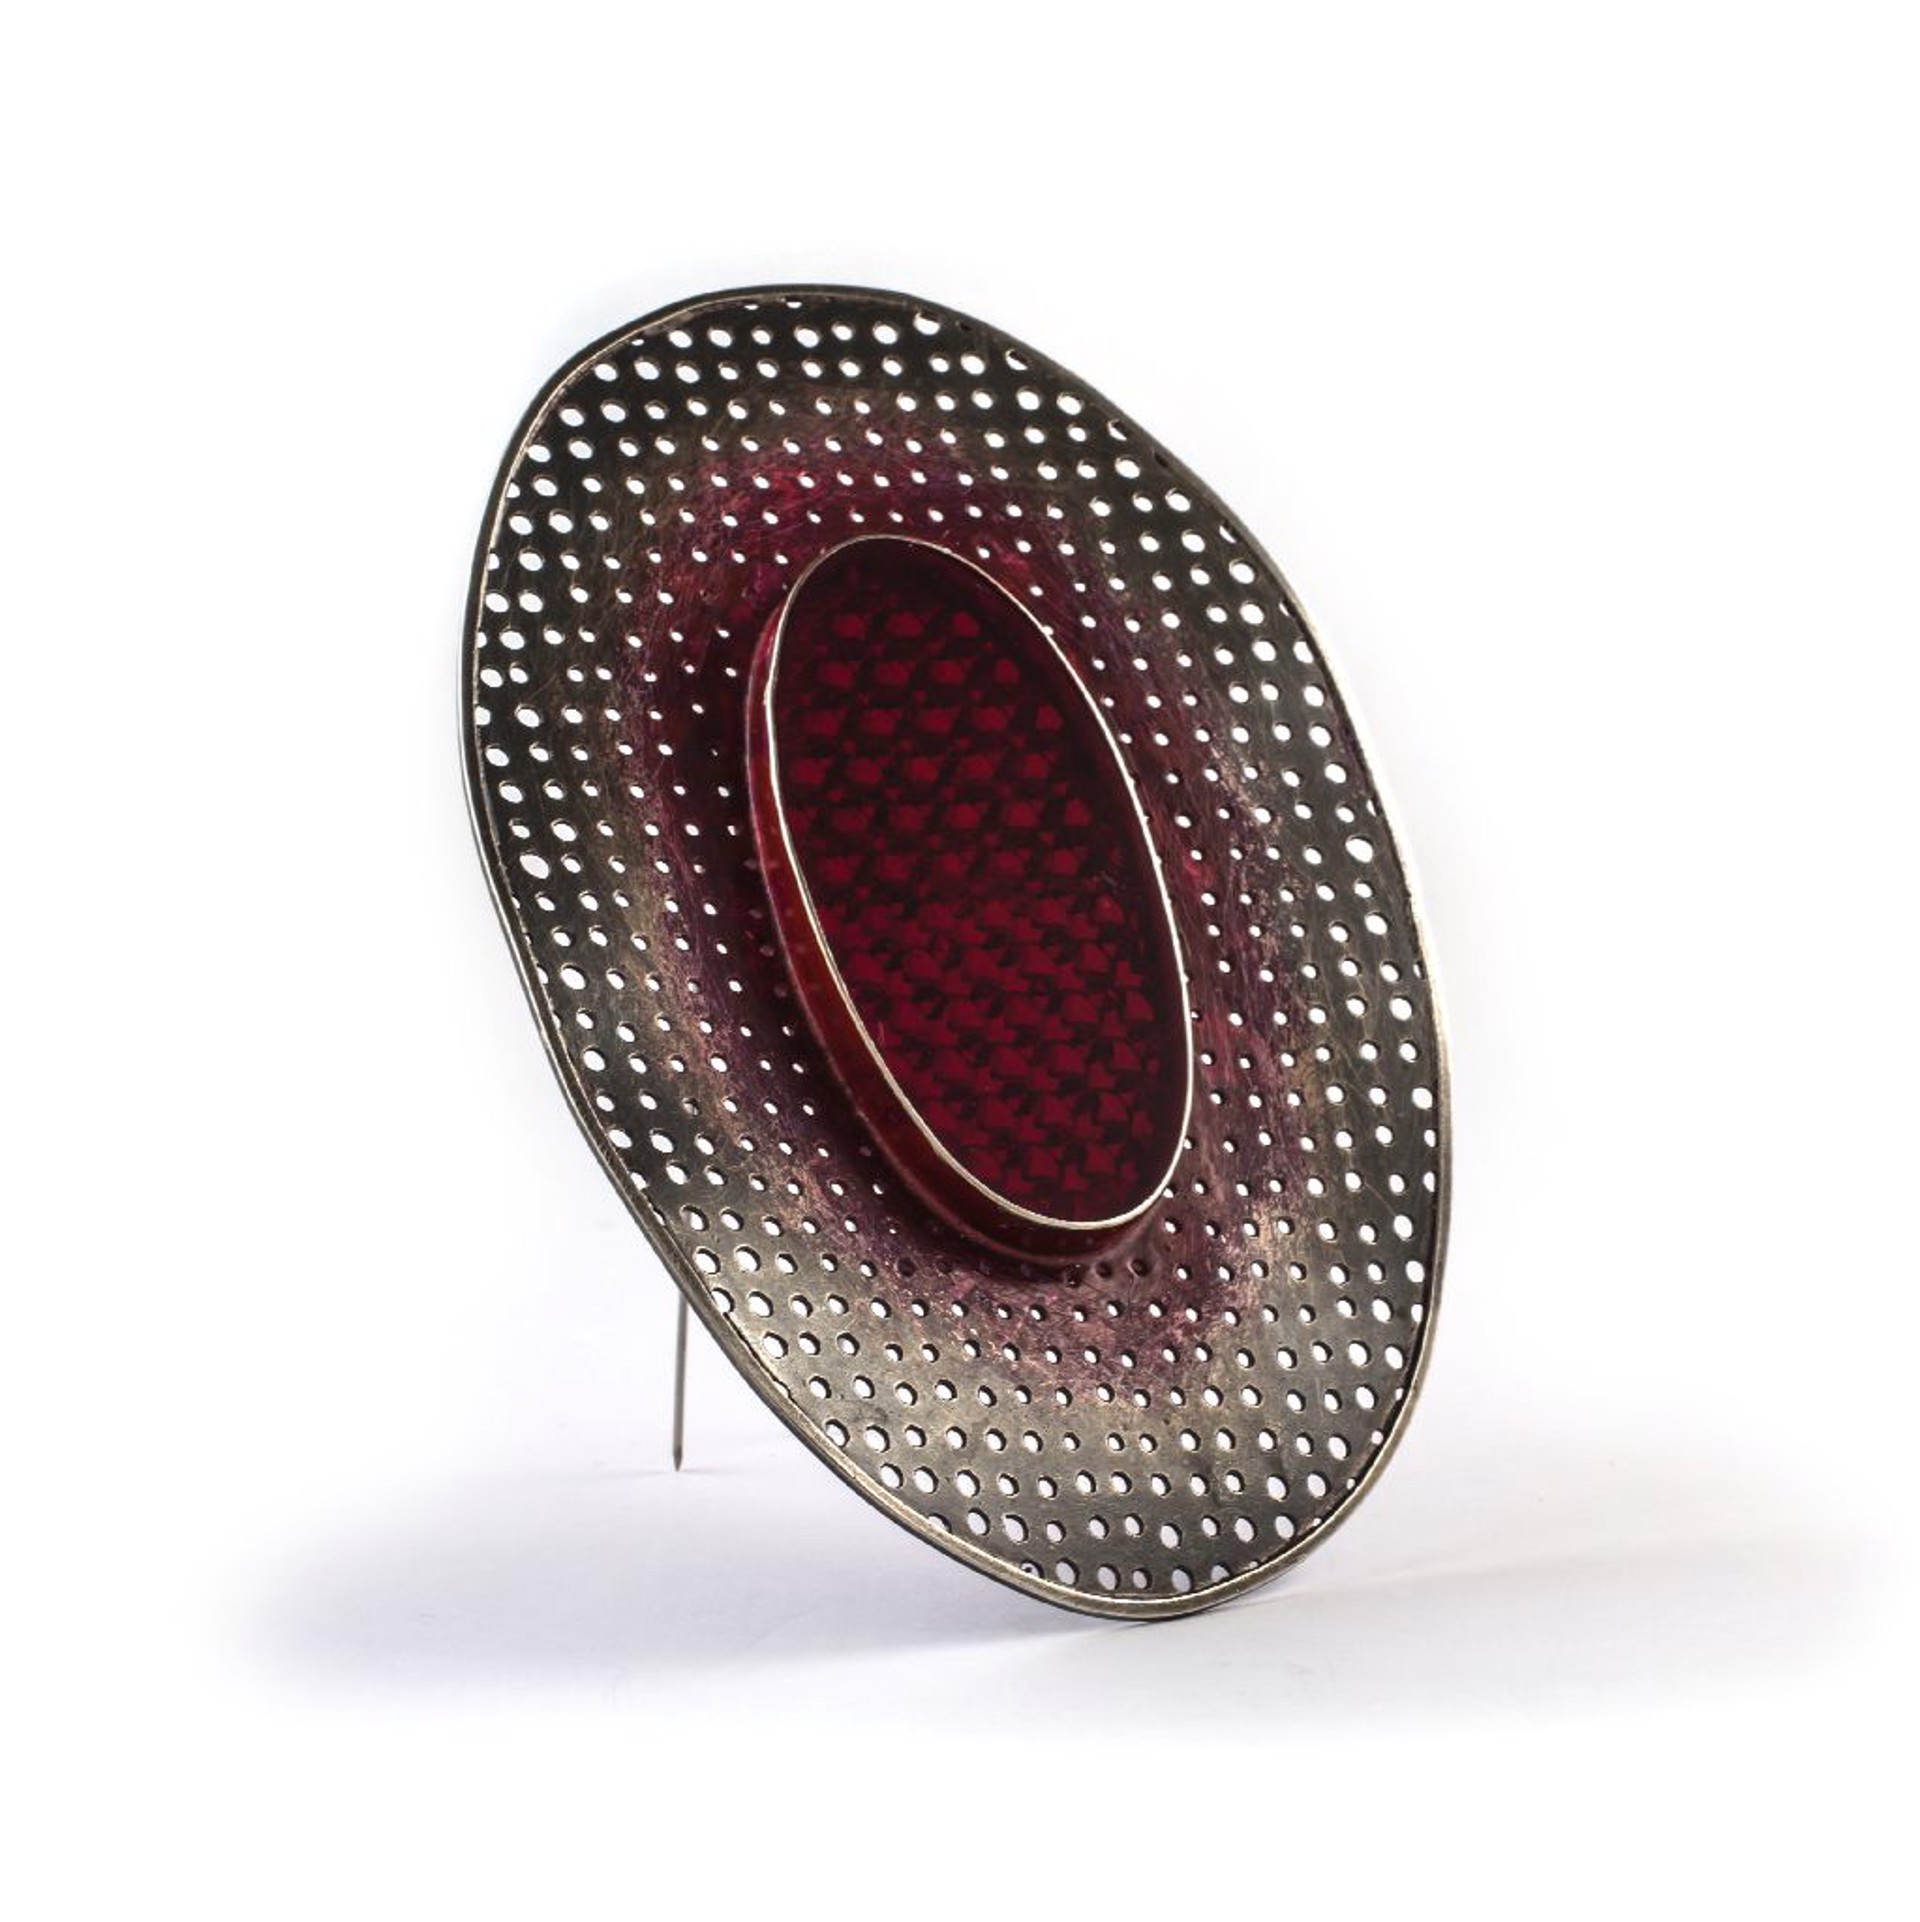 Perforated Brooch, 2014 by Daniel Kruger